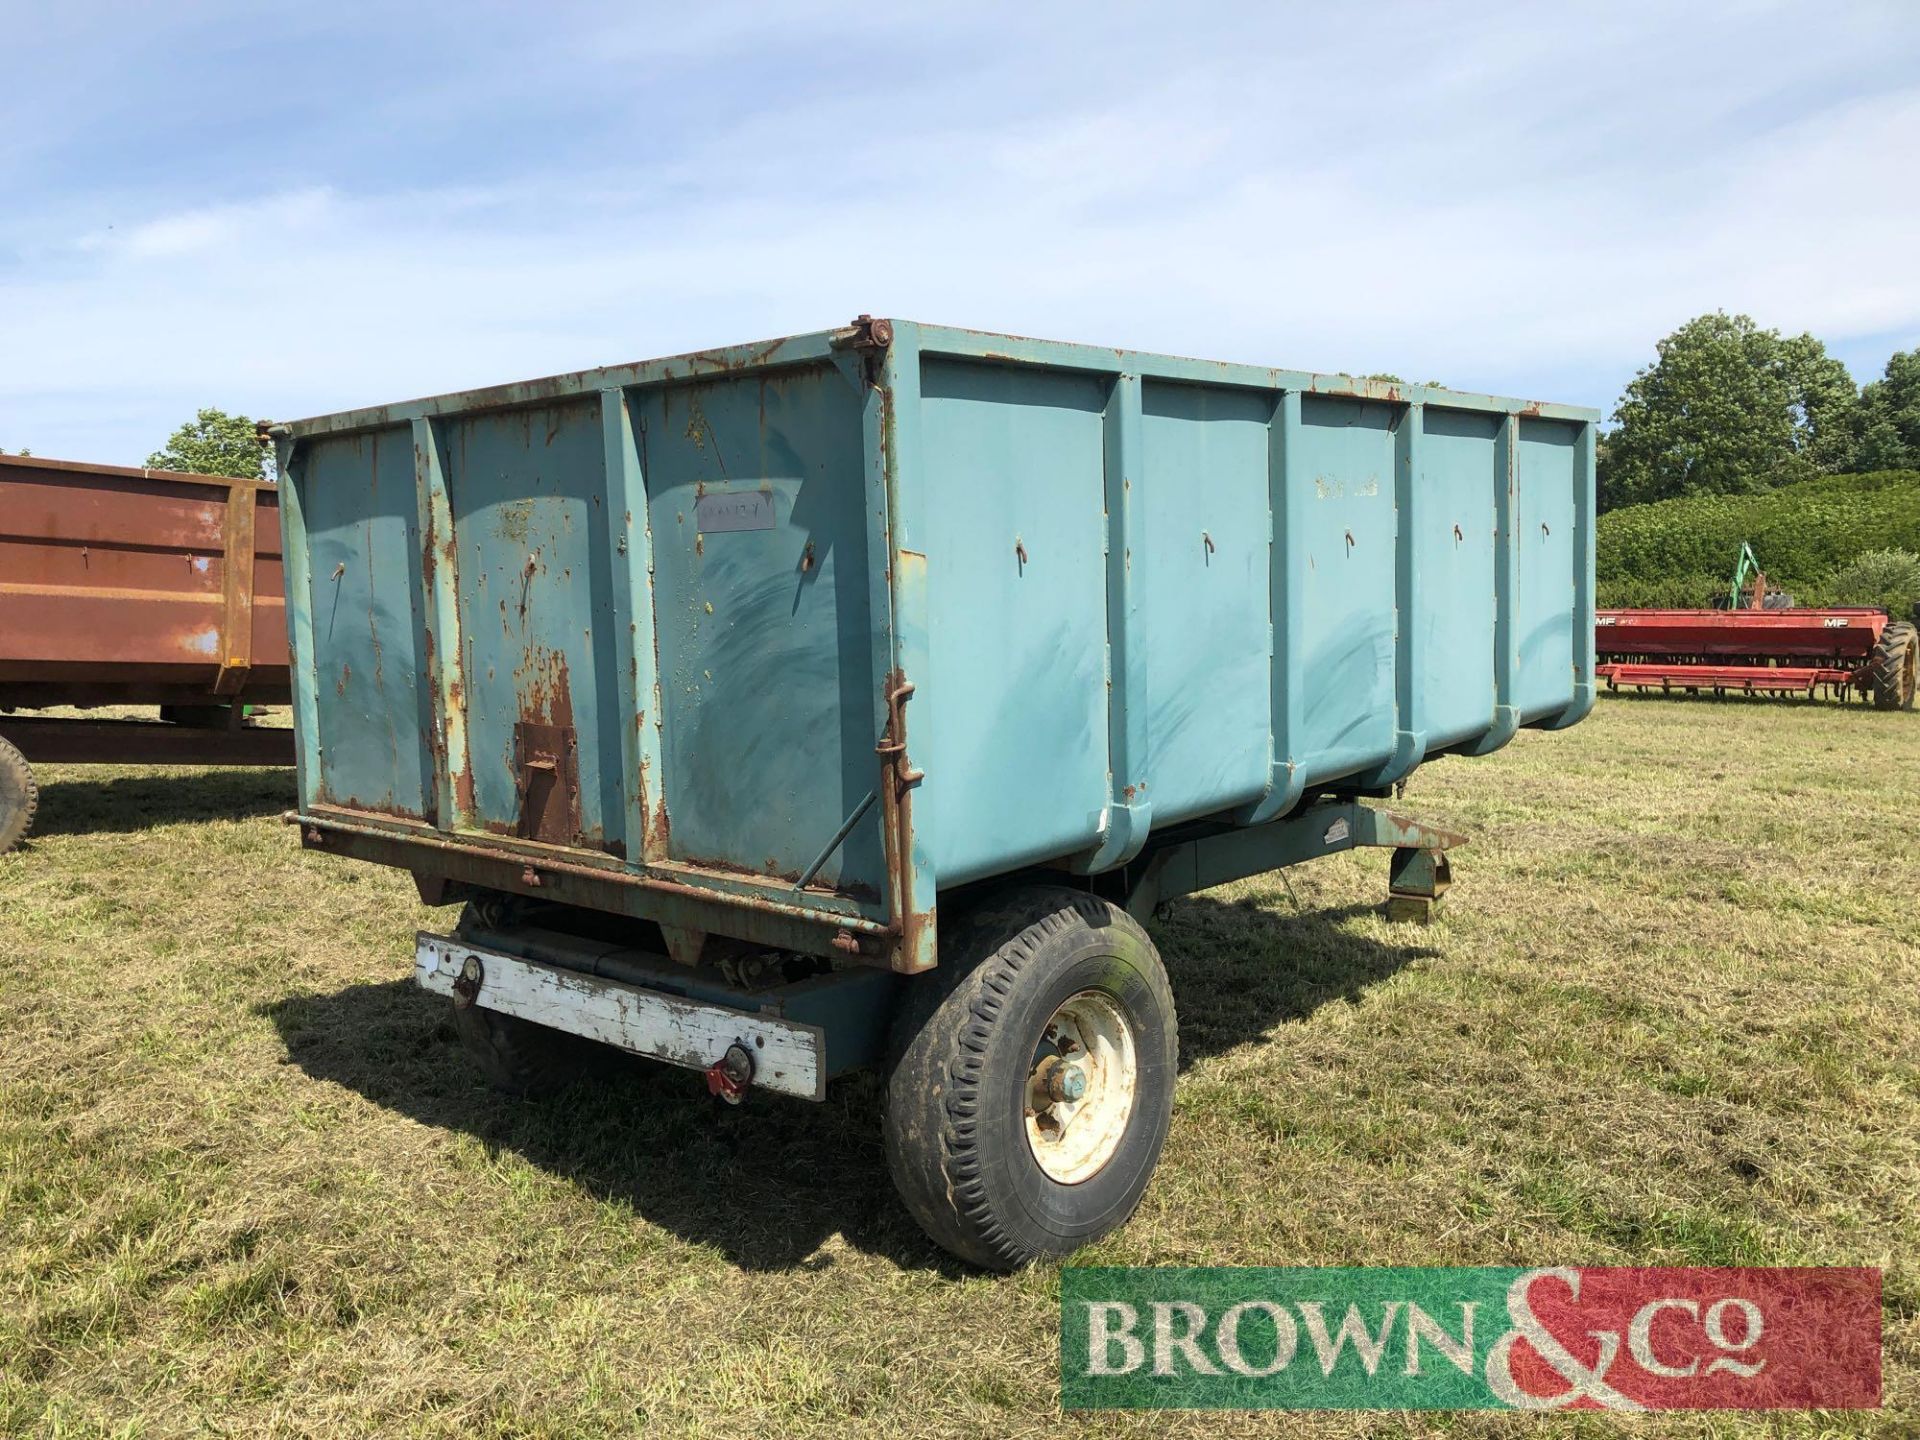 1980 Salop 6.5t single axle hydraulic tipping trailer. Serial No: 803947 - Image 5 of 6